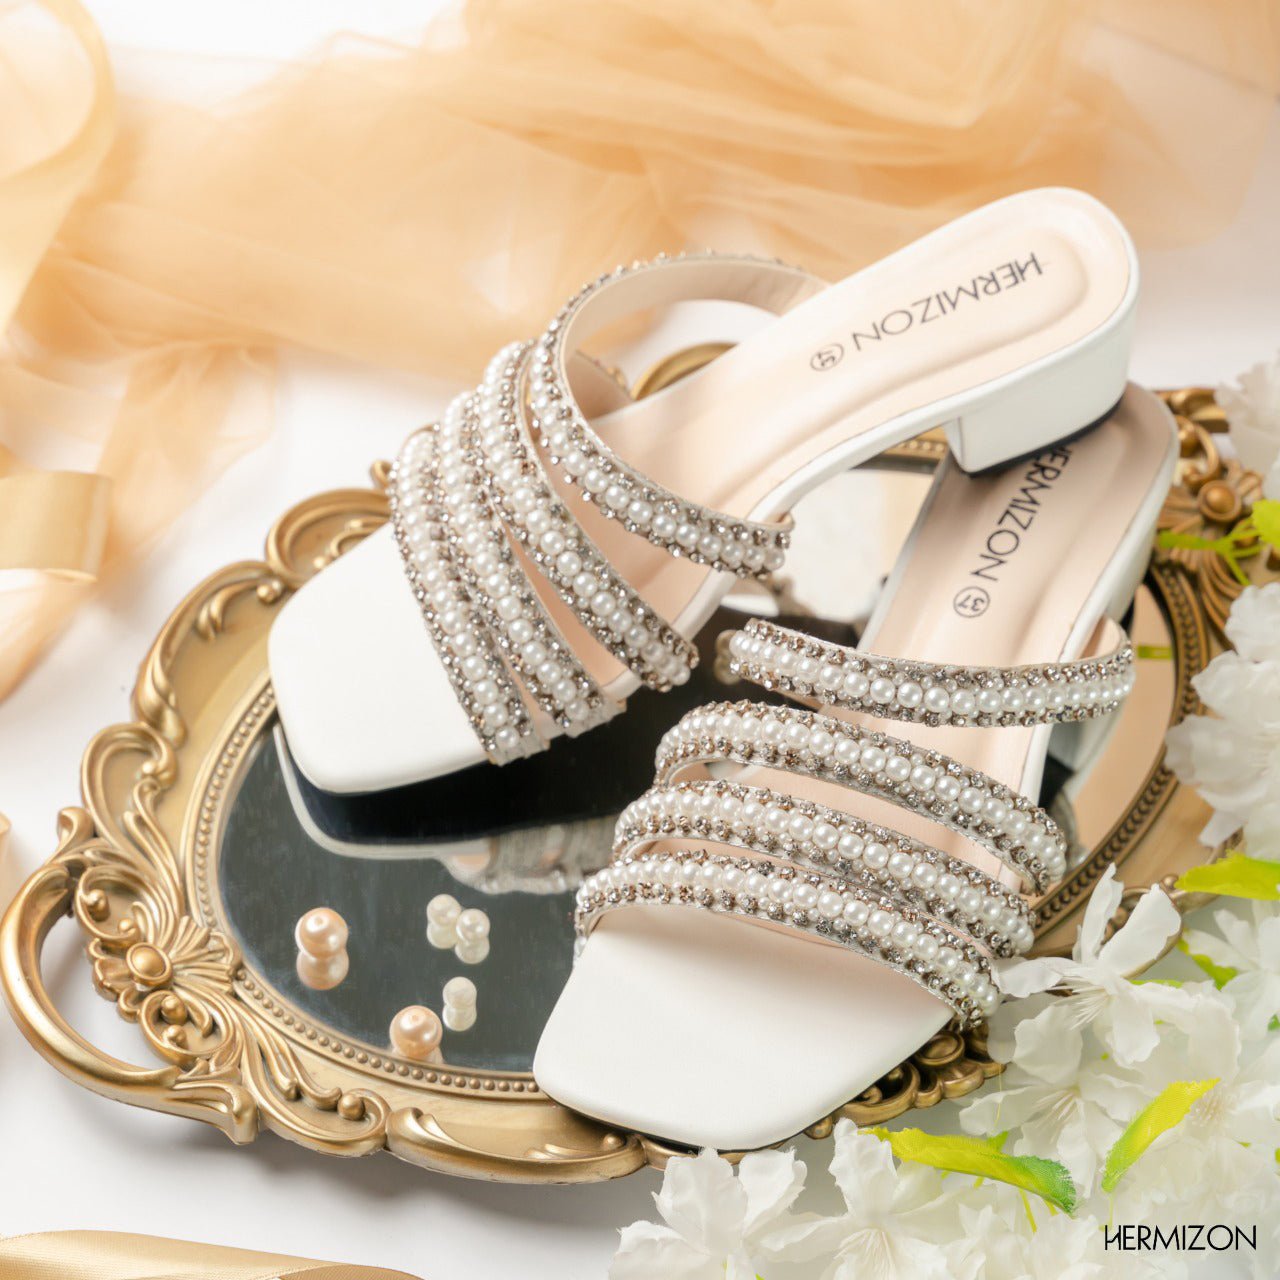 A shoe from hermizon brand which is white color and with semi heels